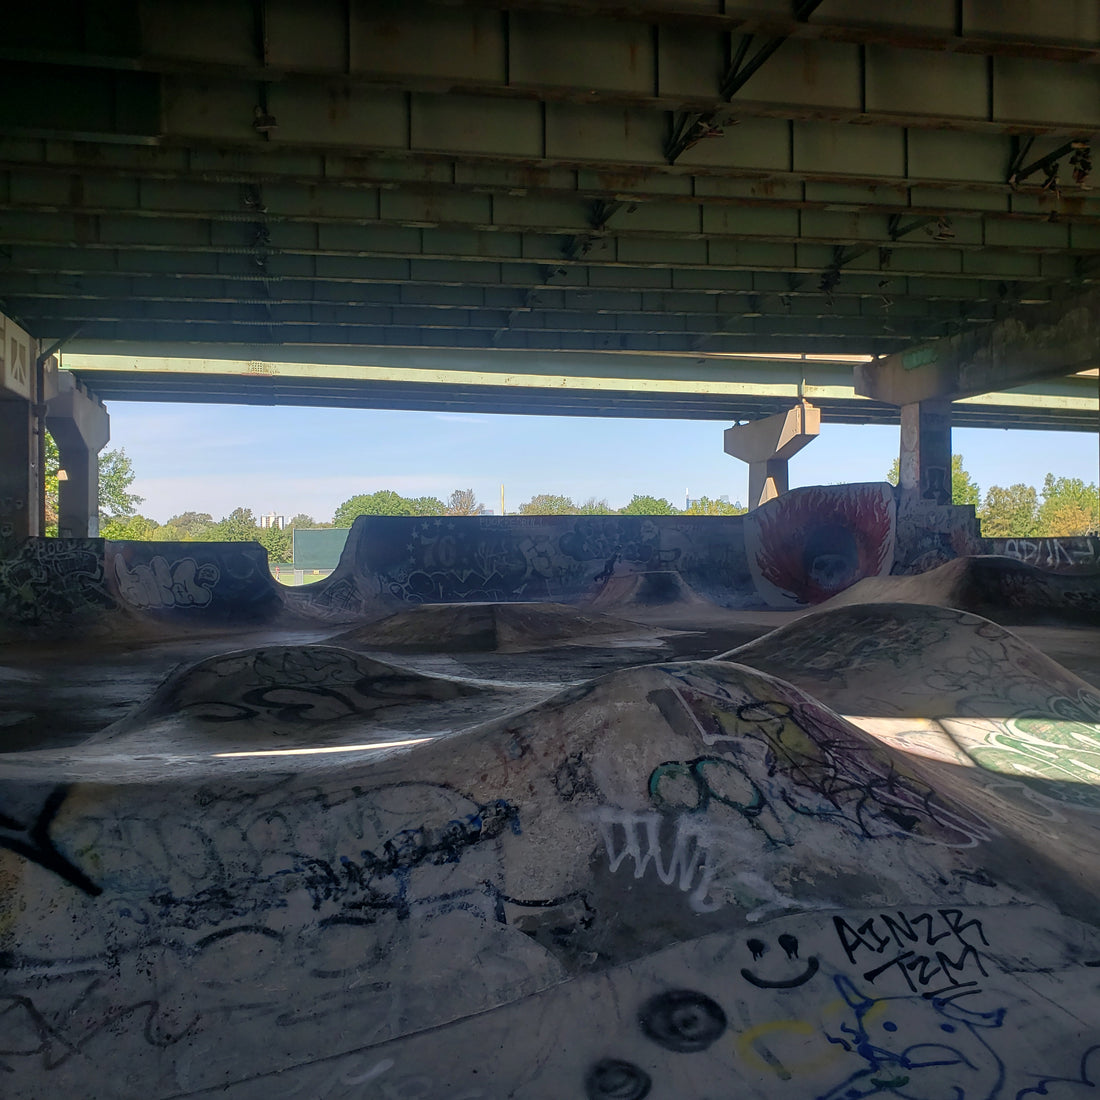 Happy Friday from FDR skateboard Park in Philly